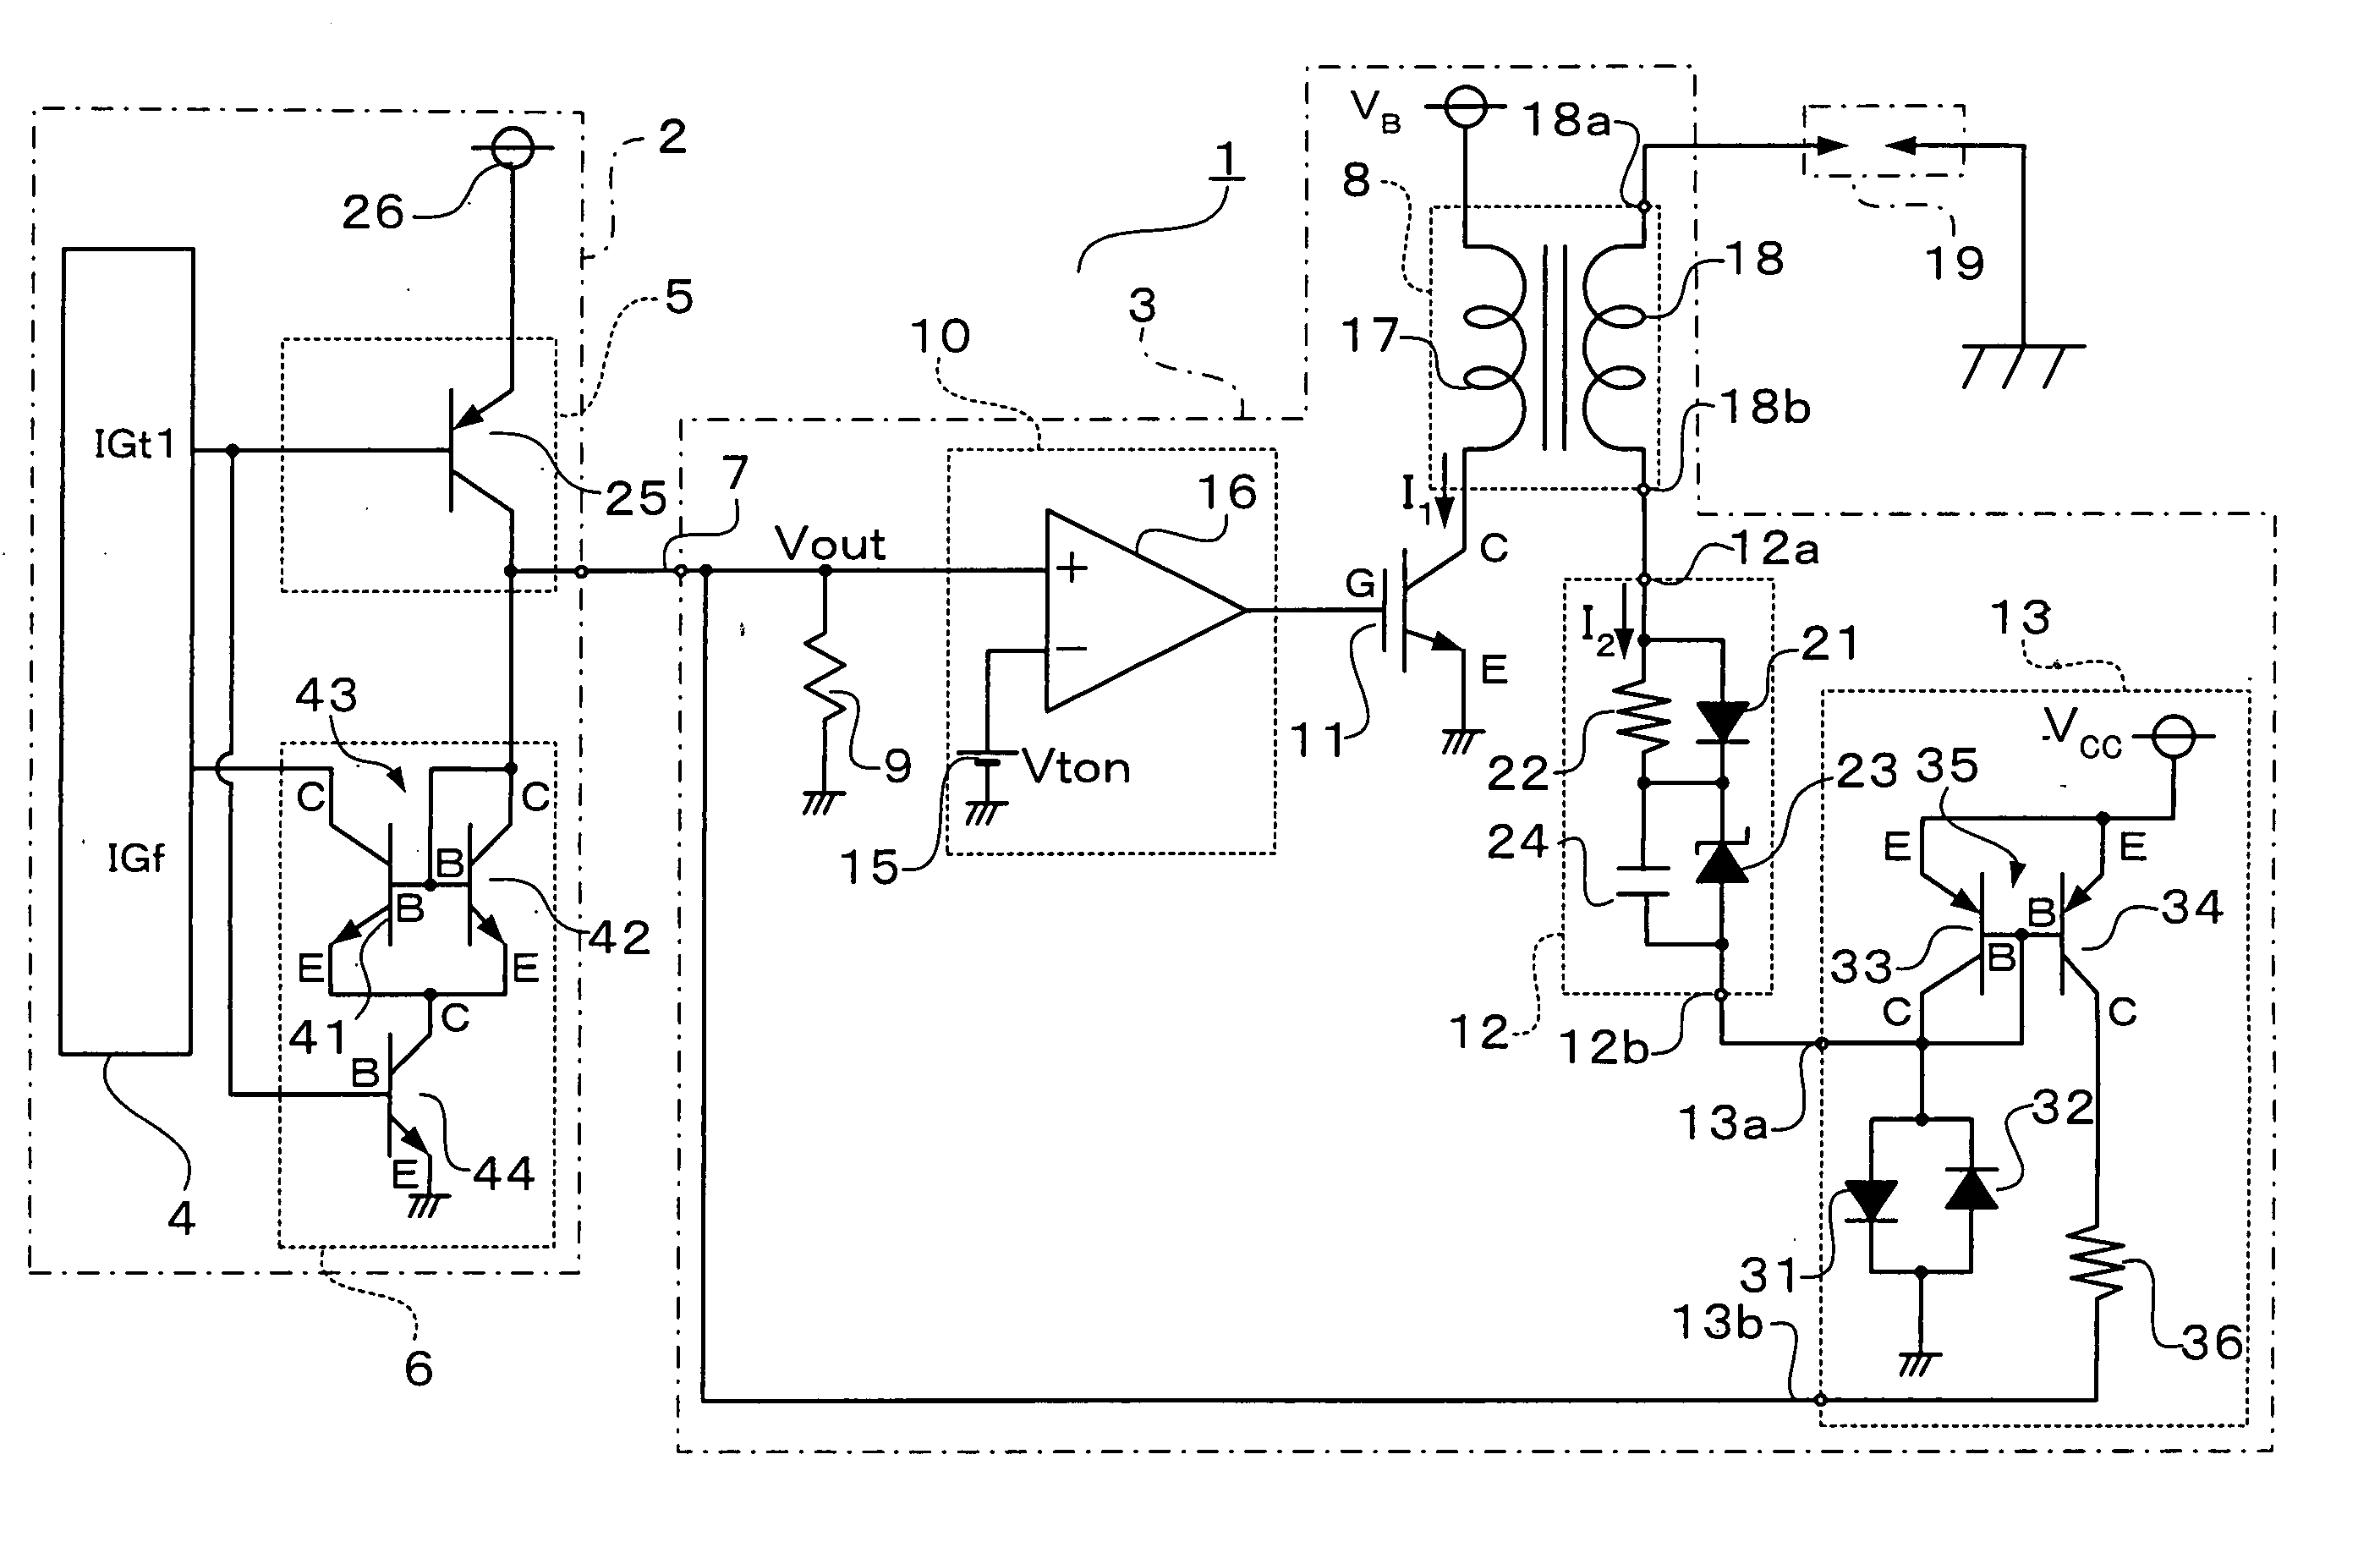 Ignition apparatus for an internal combustion engine